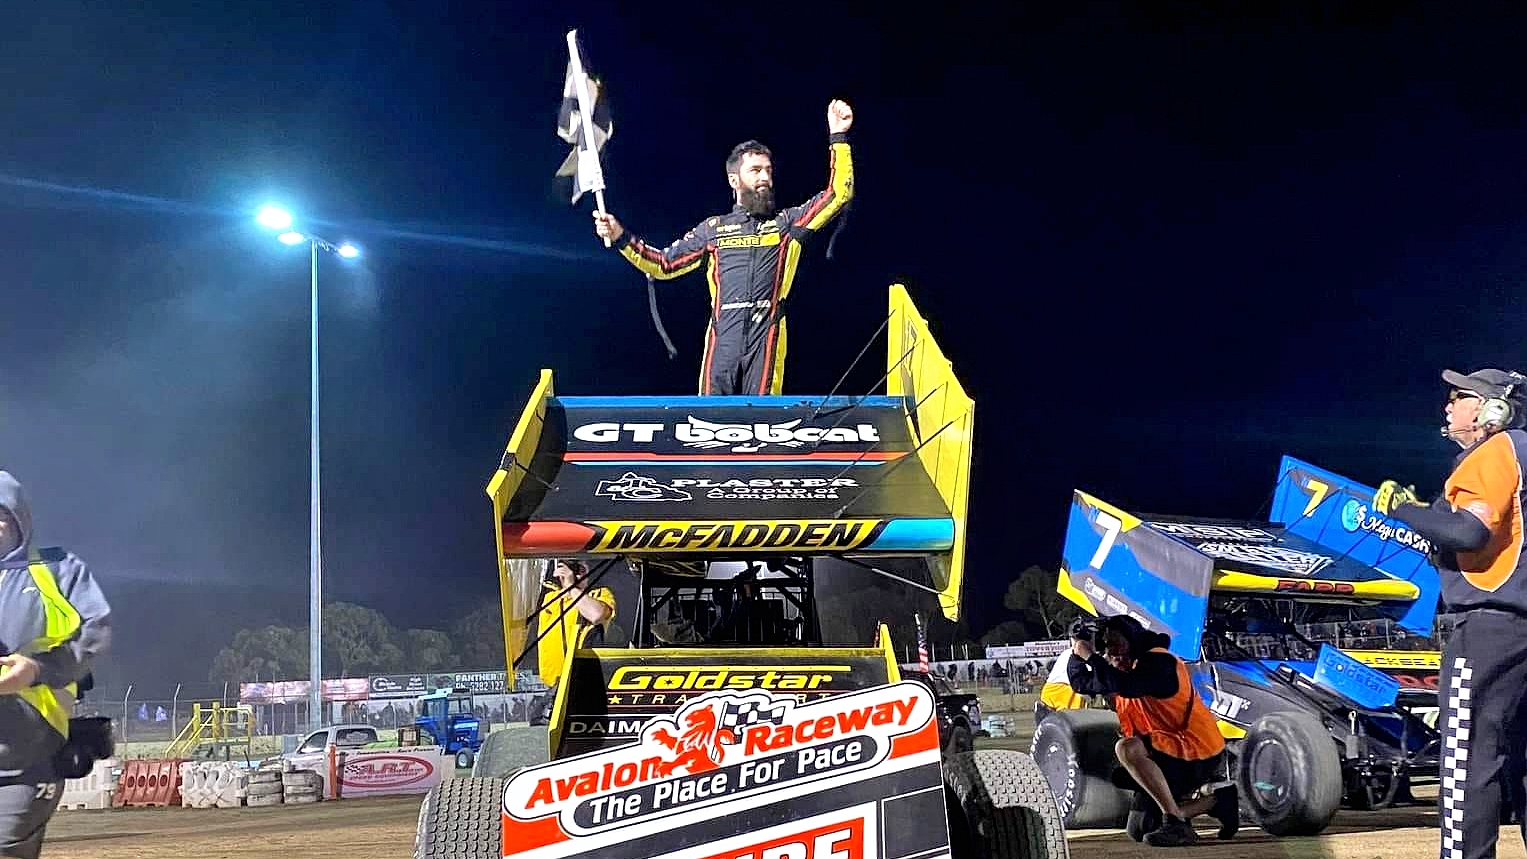 AVALON SPEEDWAY McFADDEN BACK TO BACK IN PRESIDENTS CUP Speedway